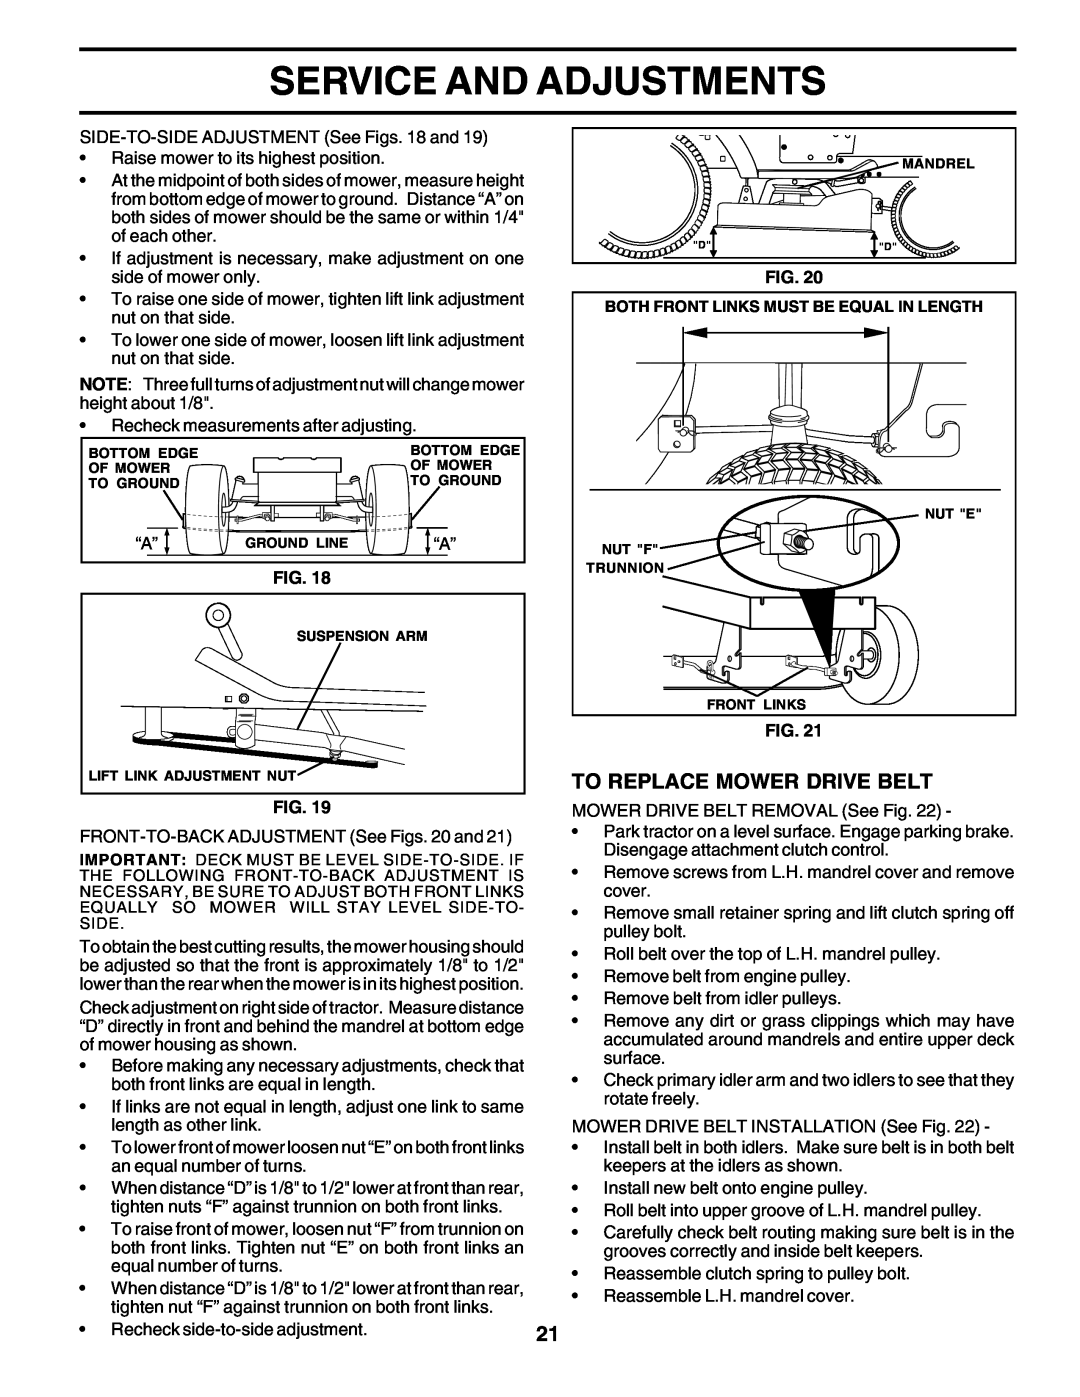 Weed Eater 178387 owner manual Service And Adjustments, To Replace Mower Drive Belt 